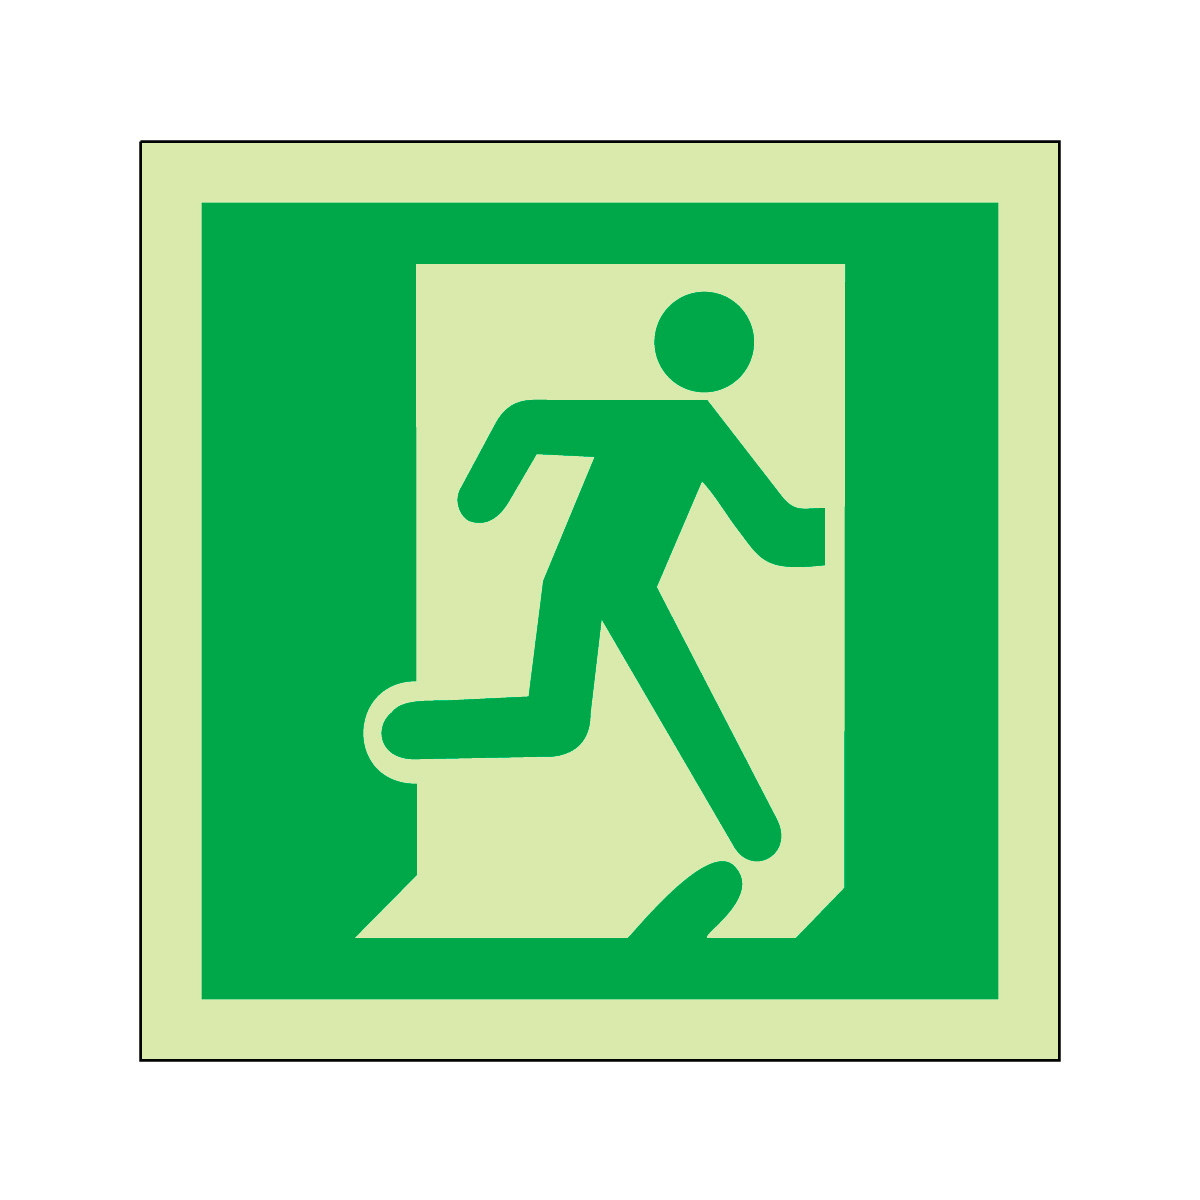 clip art highway exit sign - photo #36